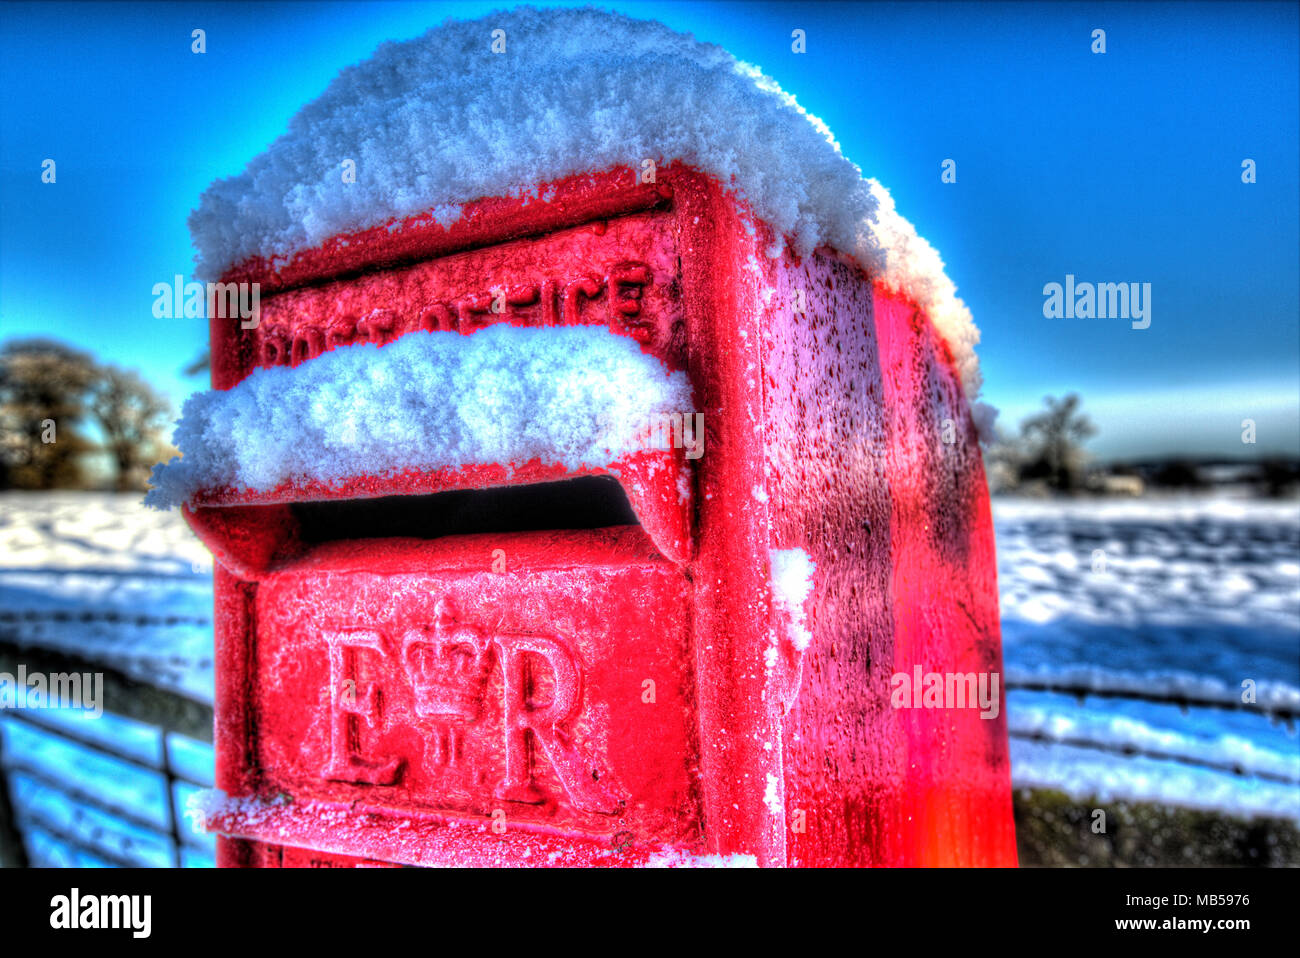 Village of Coddington, England. Artistic winter view of a red Post Office letter collection box, in the Cheshire village of Coddington. Stock Photo